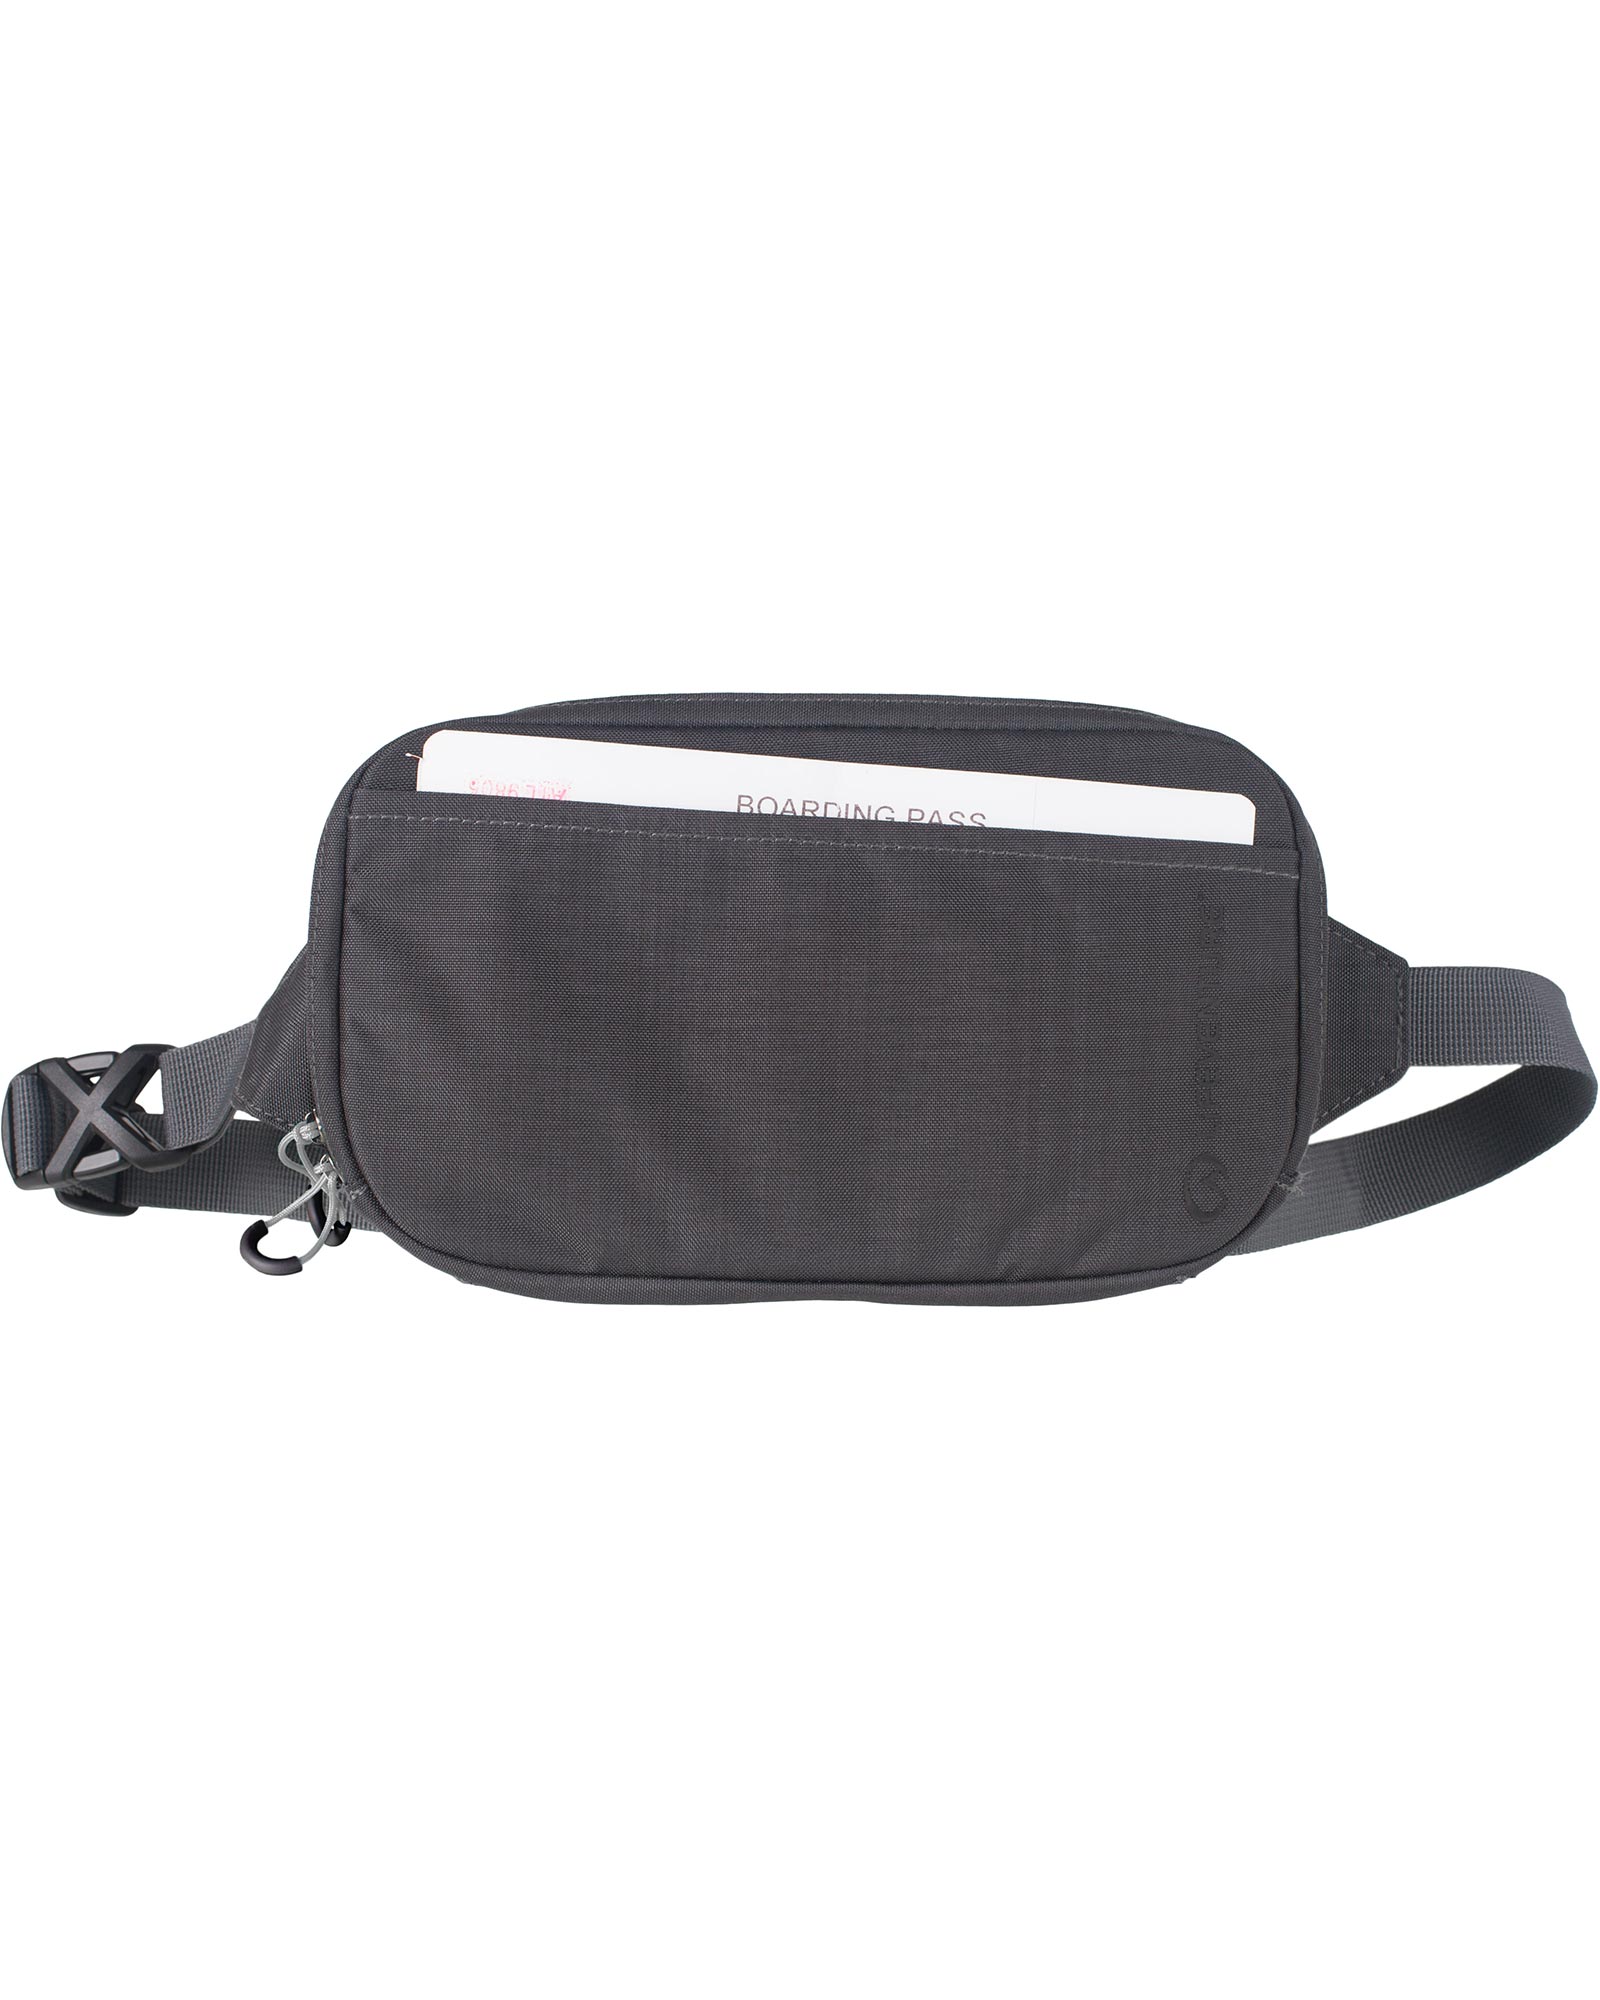 Lifeventure RFiD Travel Belt Pouch   Recycled